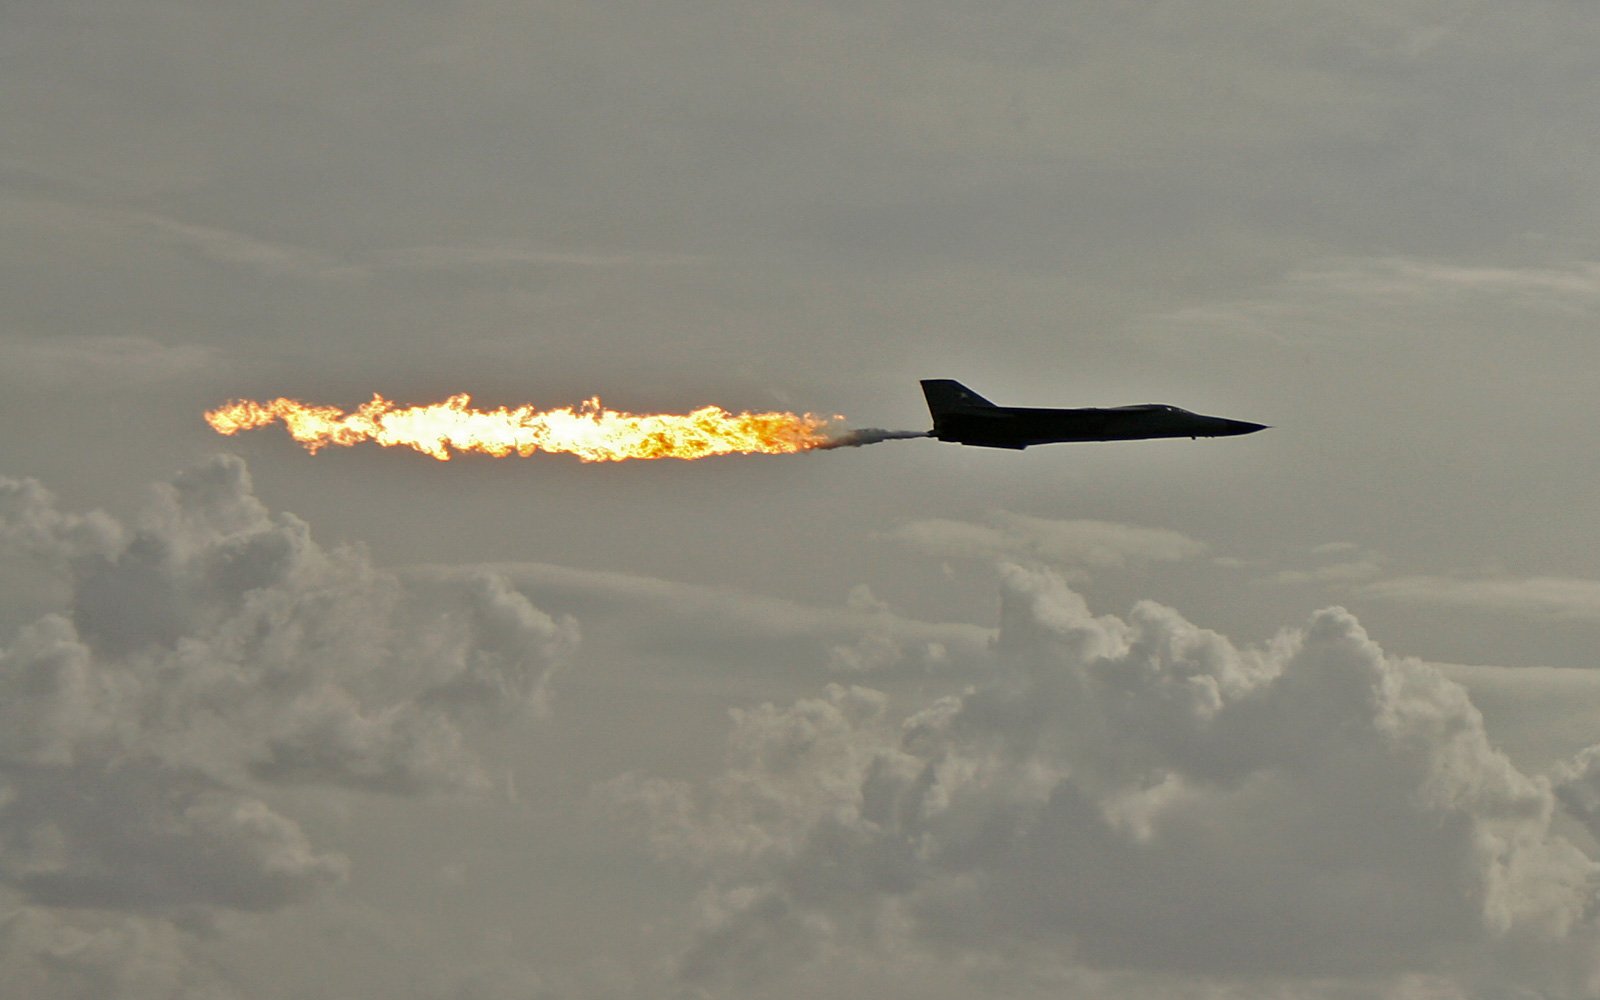 From this image, it looks like the aircraft is spraying COPIOUS amounts of fuel into the exhaust!